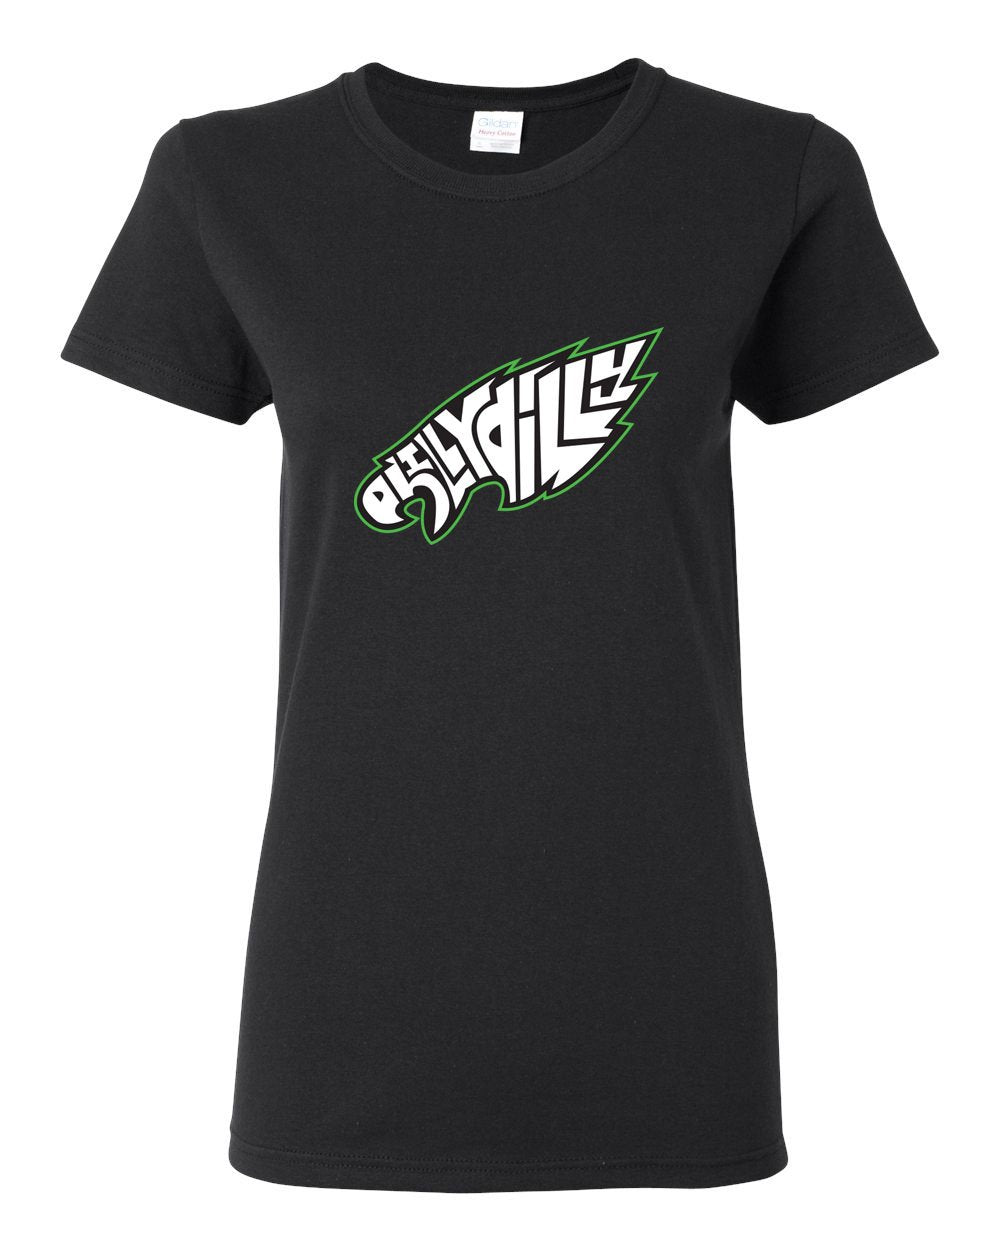 Philly Dilly LADIES Missy-Fit T-Shirt